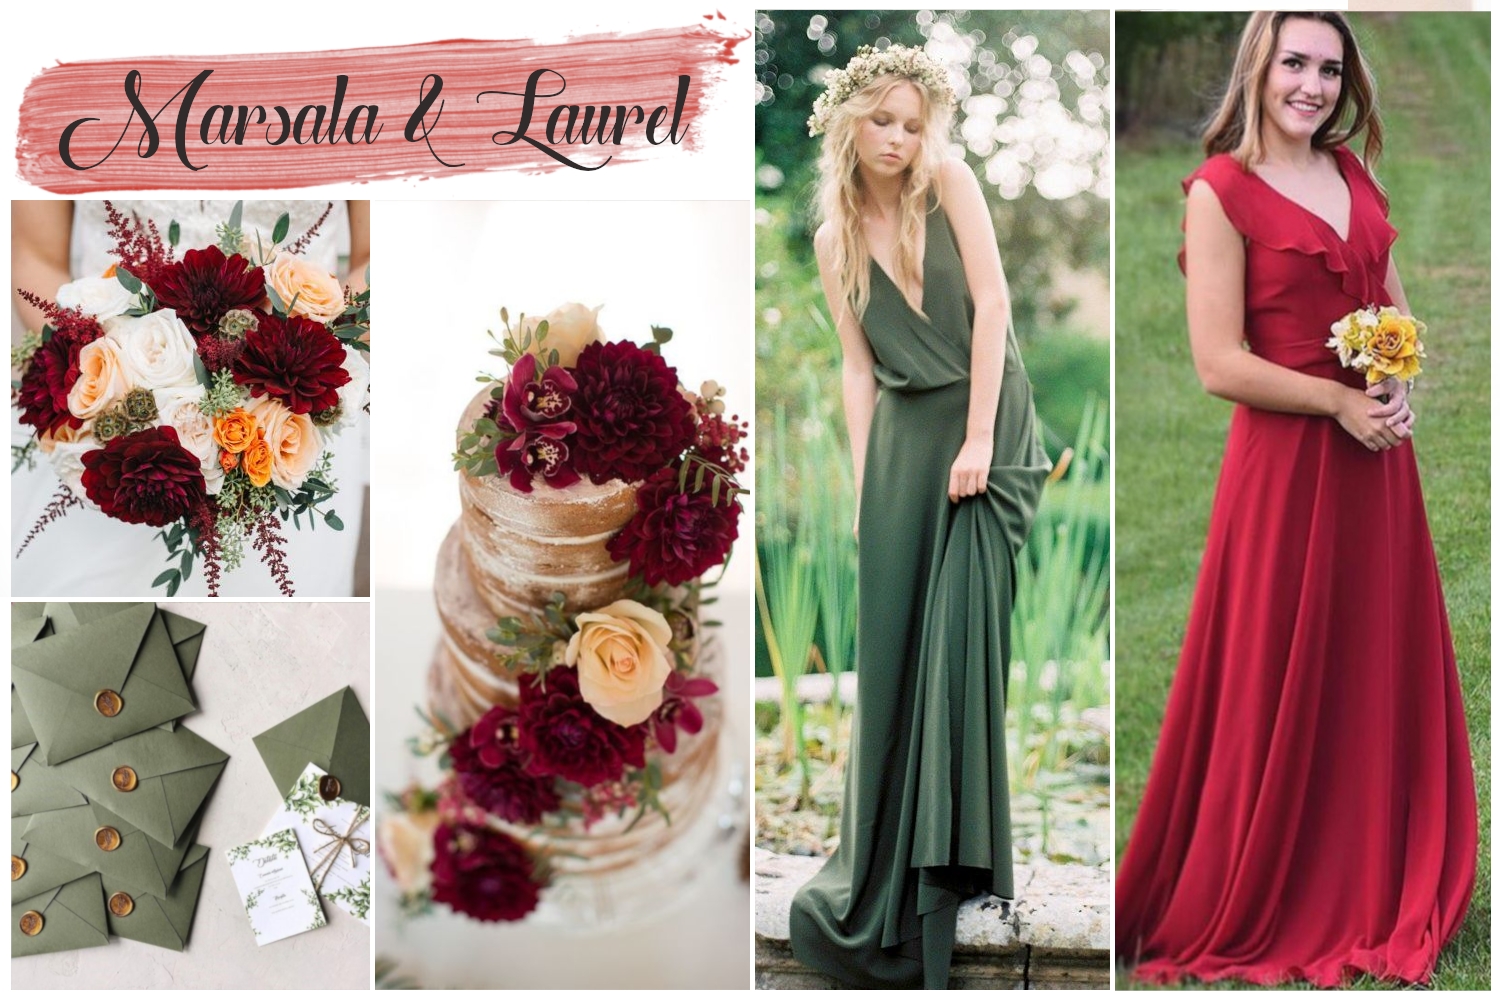 color inspiration collage with Marsala and laurel Wedding palette